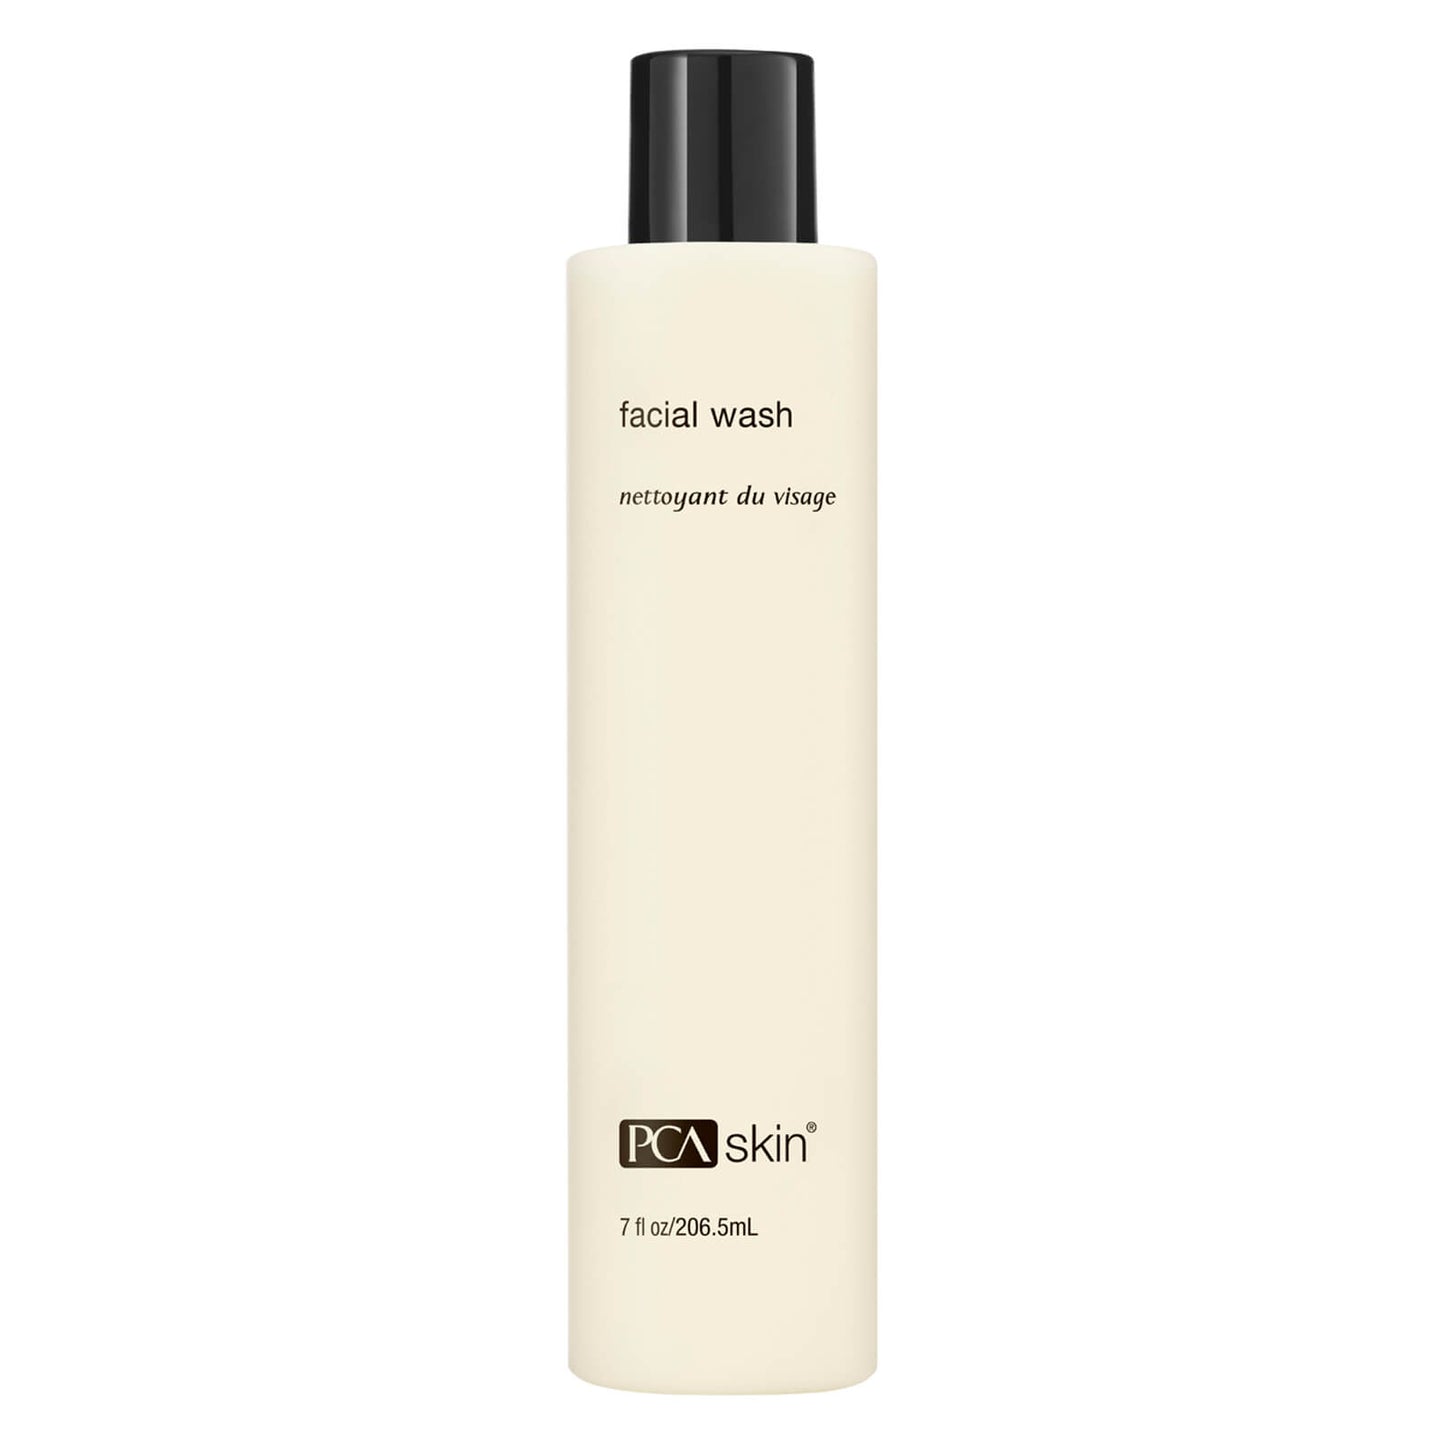 https://sophiescosmetics.com/products/pca-facial-wash-7-3-fl-oz-all-skin-types